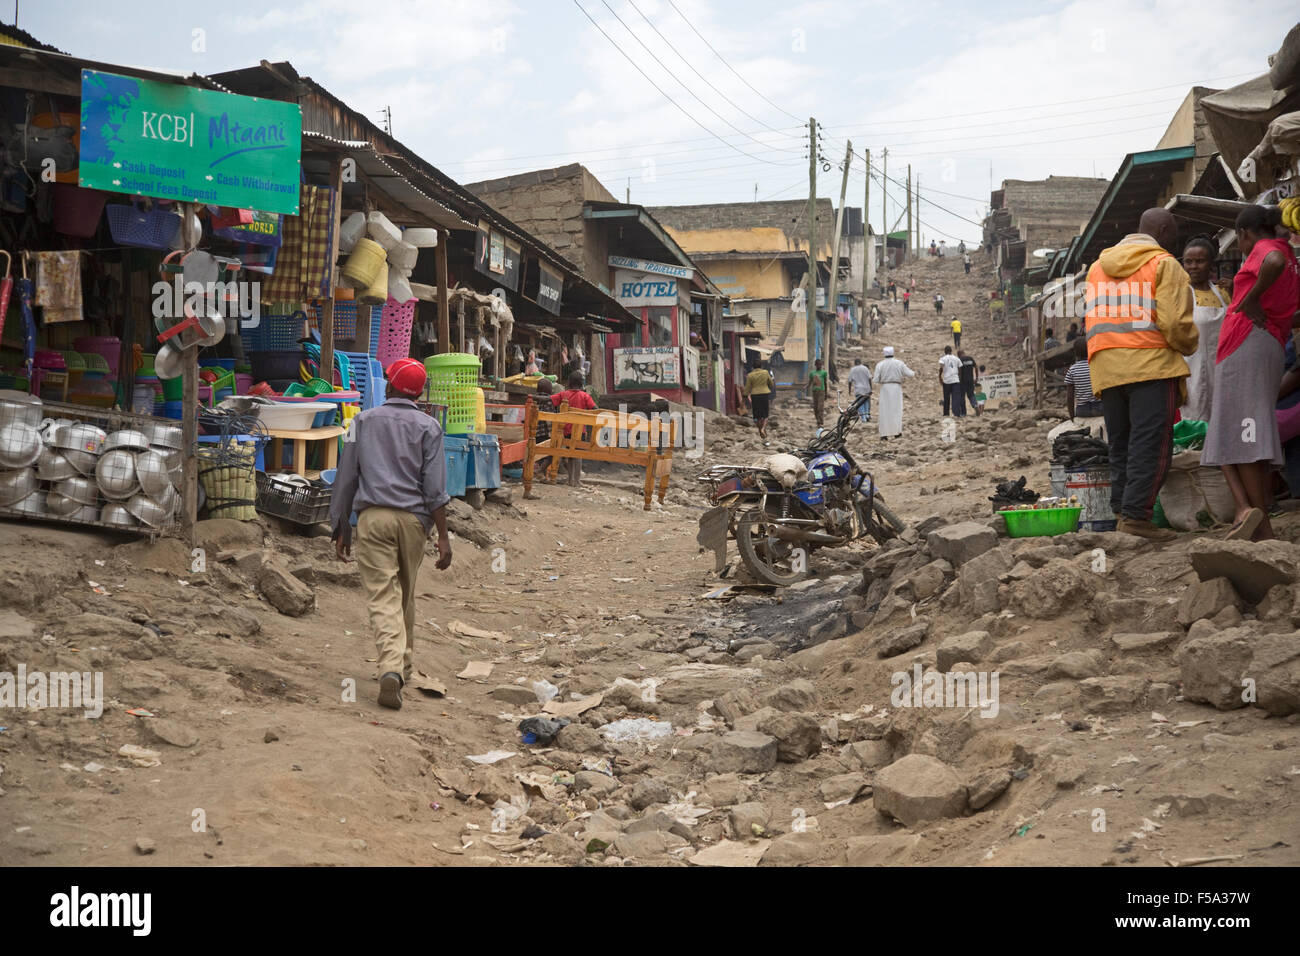 People and shops in rough rocky street Kamere shanty town Naivasha Kenya  Stock Photo - Alamy